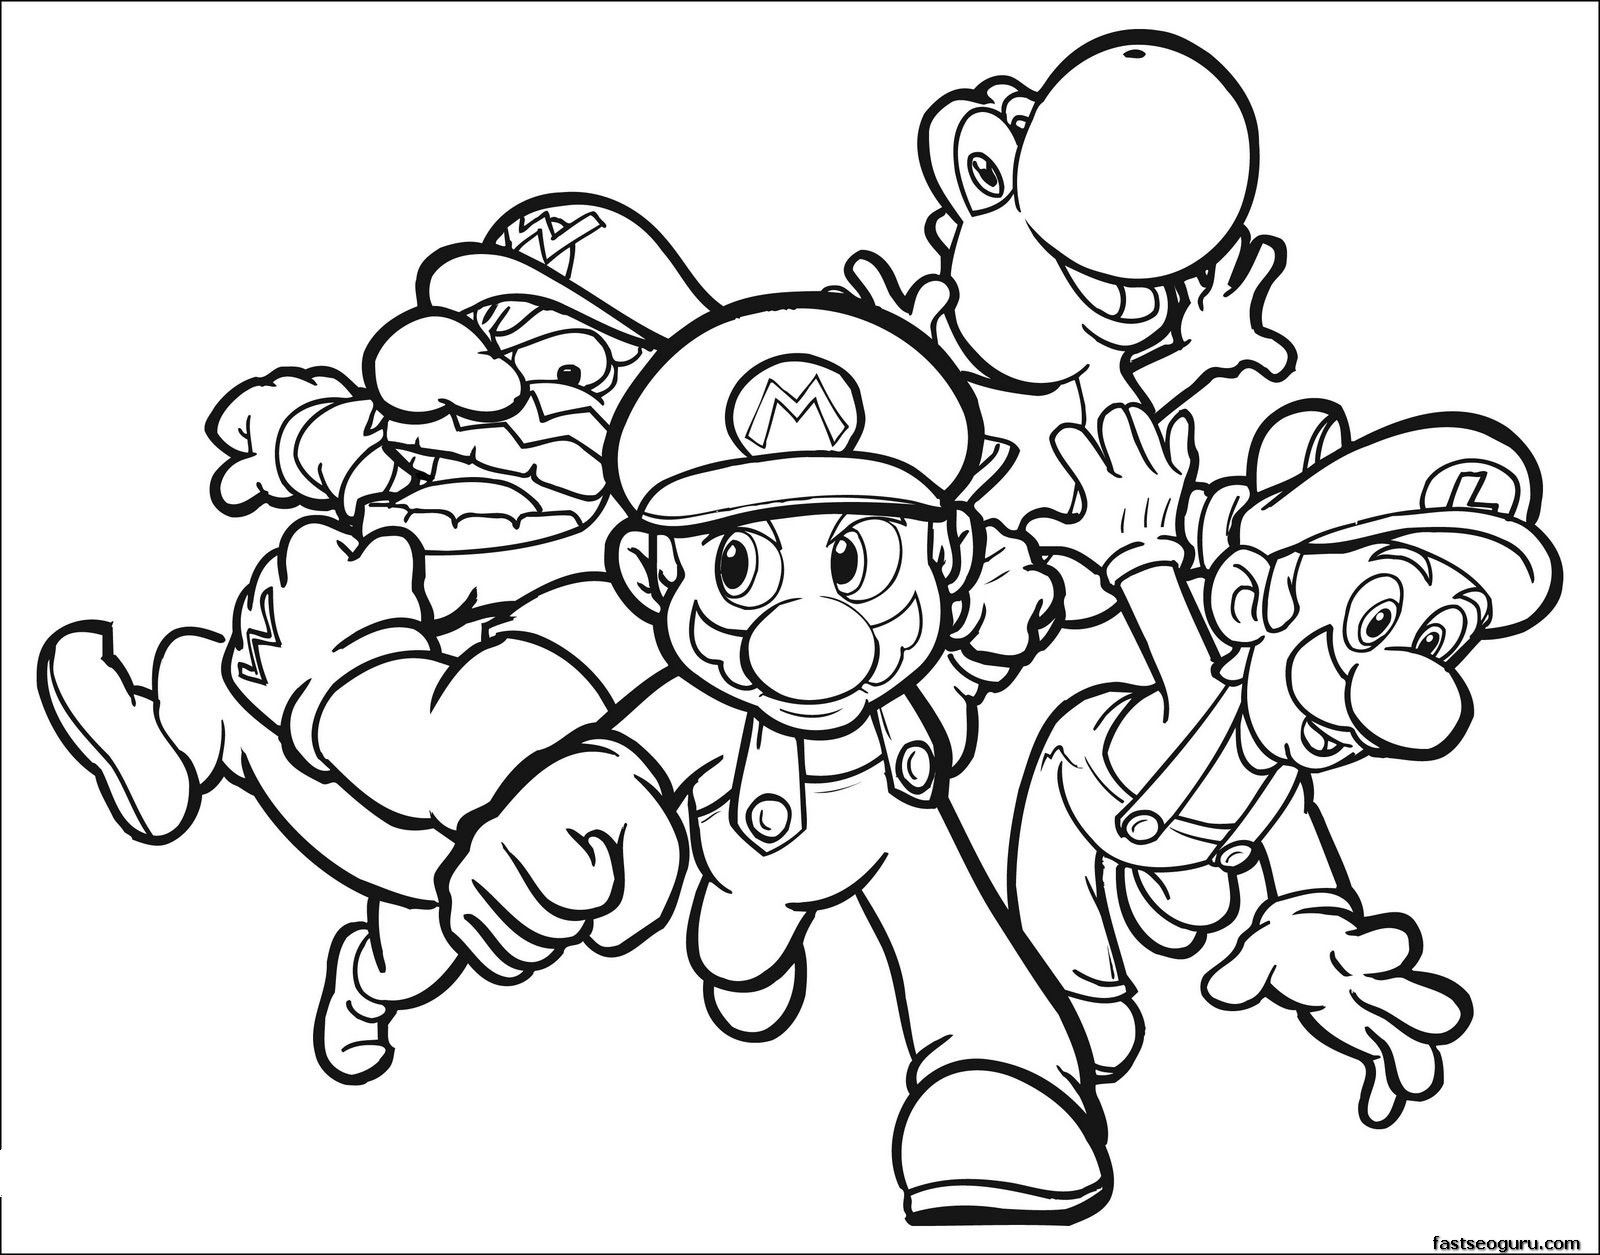 Kindergarten Coloring Pages Easy